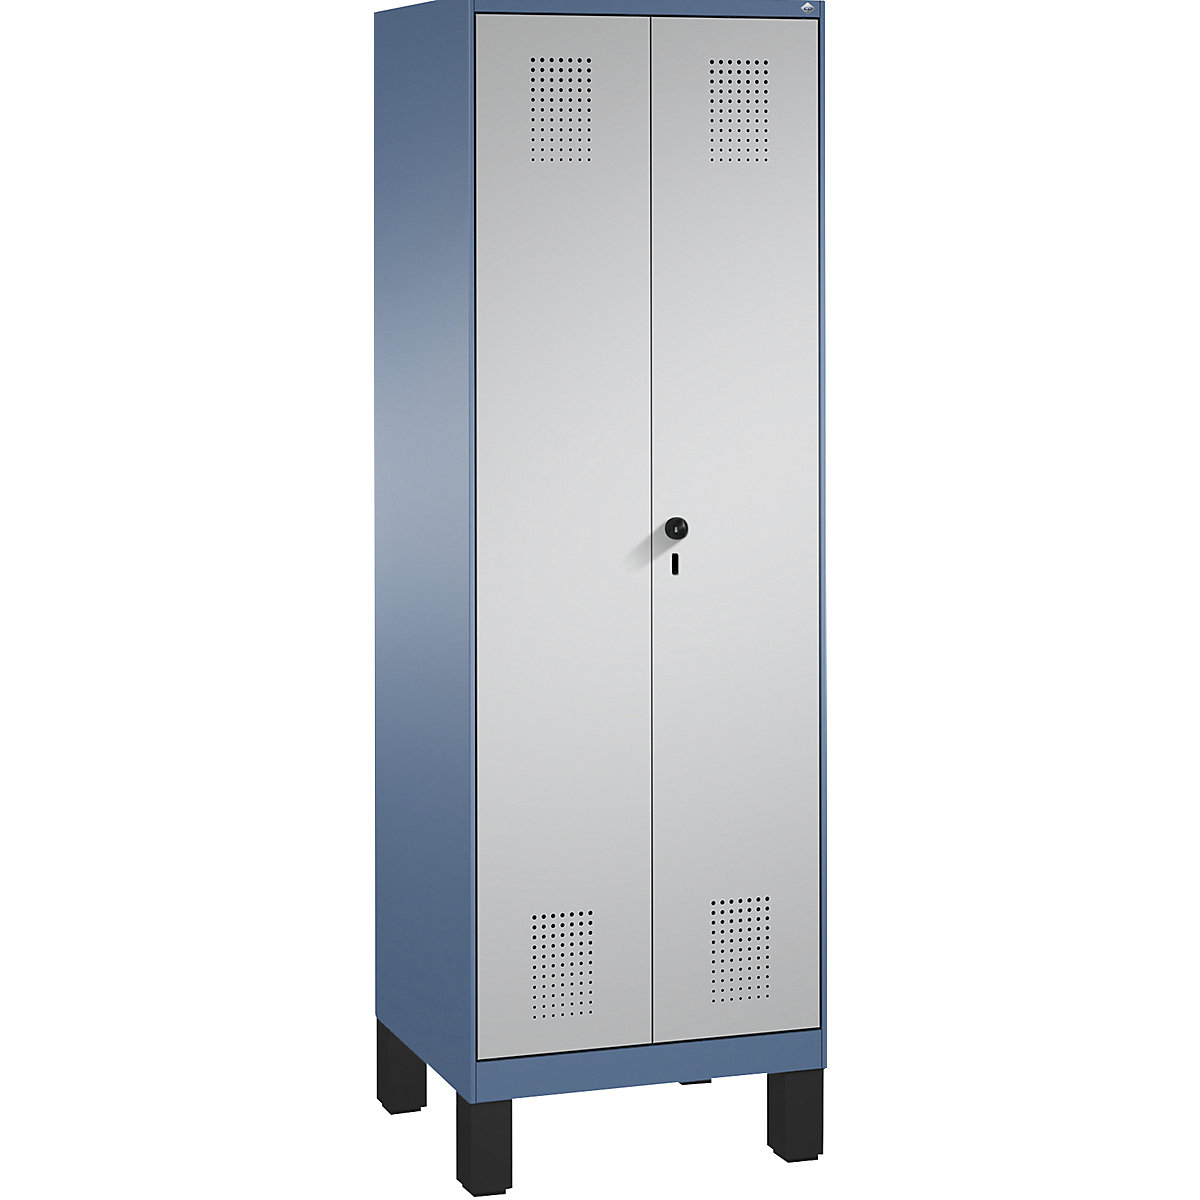 EVOLO storage cupboard, doors close in the middle, with feet – C+P, 2 compartments, 8 shelves, compartment width 300 mm, distant blue / white aluminium